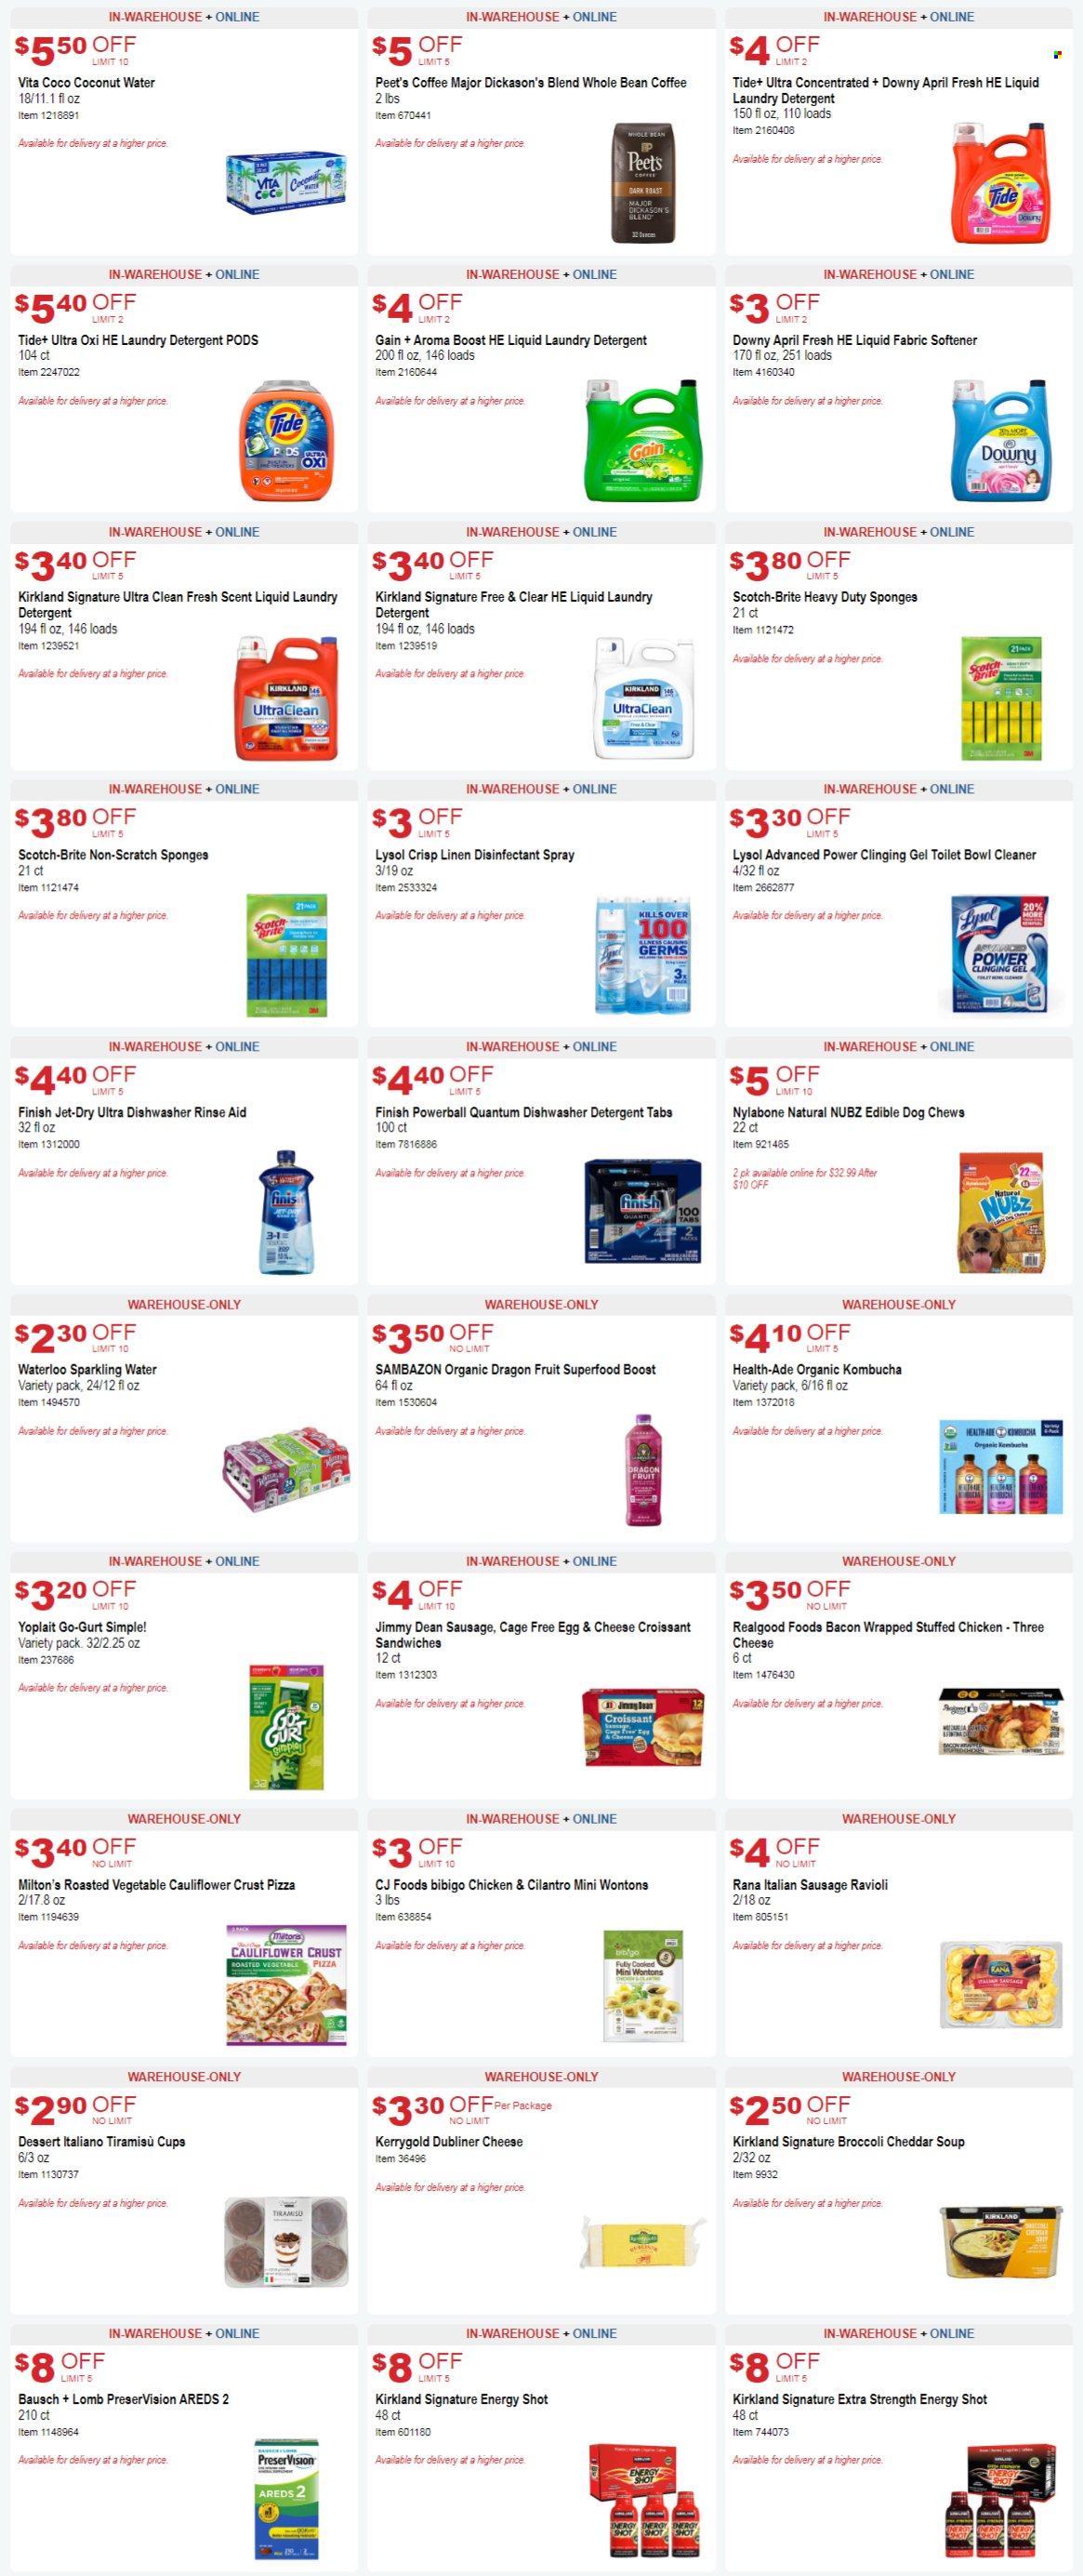 thumbnail - Costco Flyer - 09/28/2022 - 10/23/2022 - Sales products - toilet, croissant, tiramisu, broccoli, dragon fruit, ravioli, pizza, sandwich, soup, Rana, Jimmy Dean, stuffed chicken, bacon, sausage, italian sausage, Yoplait, eggs, cage free eggs, cilantro, coconut water, sparkling water, kombucha, Boost, coffee, detergent, Gain, cleaner, desinfection, Lysol, toilet bowl, Tide, fabric softener, laundry detergent, Finish Powerball, Jet, Brite, antibacterial spray, sponge, cup, linens, Nylabone, animal treats, dog food, dog chews. Page 6.